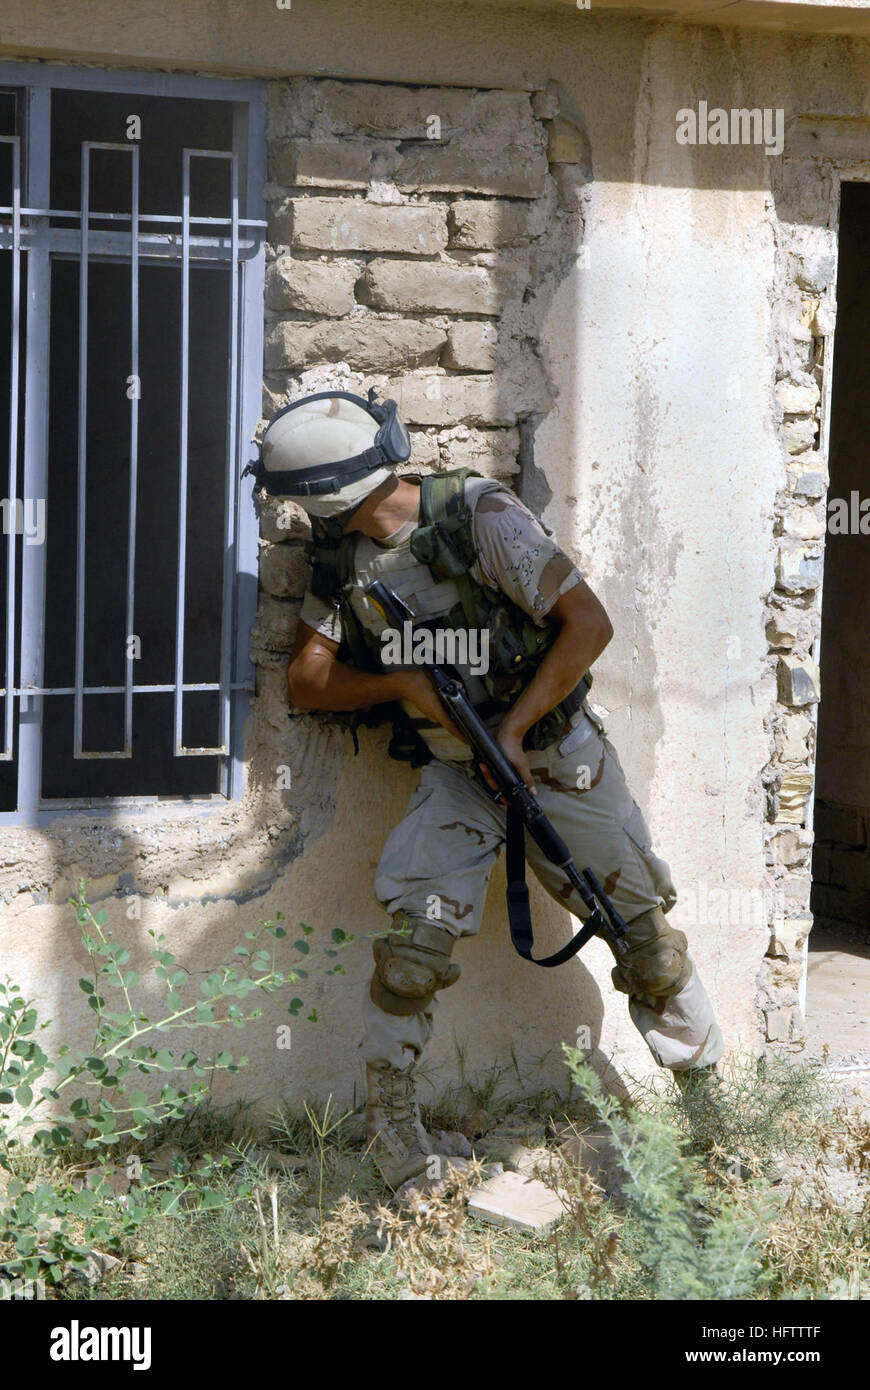 070712-N-9500T-143 KHAN BANI SA'AD, Iraq (July 12, 2007) - An Iraqi army soldier peers through a window of a possible enemy position during a joint mission. Soldiers from Alpha Battery, 2nd Battalion, 12th Infantry Regiment, 2nd Infantry Division and units of the Iraqi army are conducting a cordon and search mission to clear the area of insurgents and cache sites. U.S. Navy photo by Mass Communication Specialist 2nd Class Scott Taylor (RELEASED) US Navy 070712-N-9500T-143 An Iraqi army soldier peers through a window of a possible enemy position during a joint mission Stock Photo